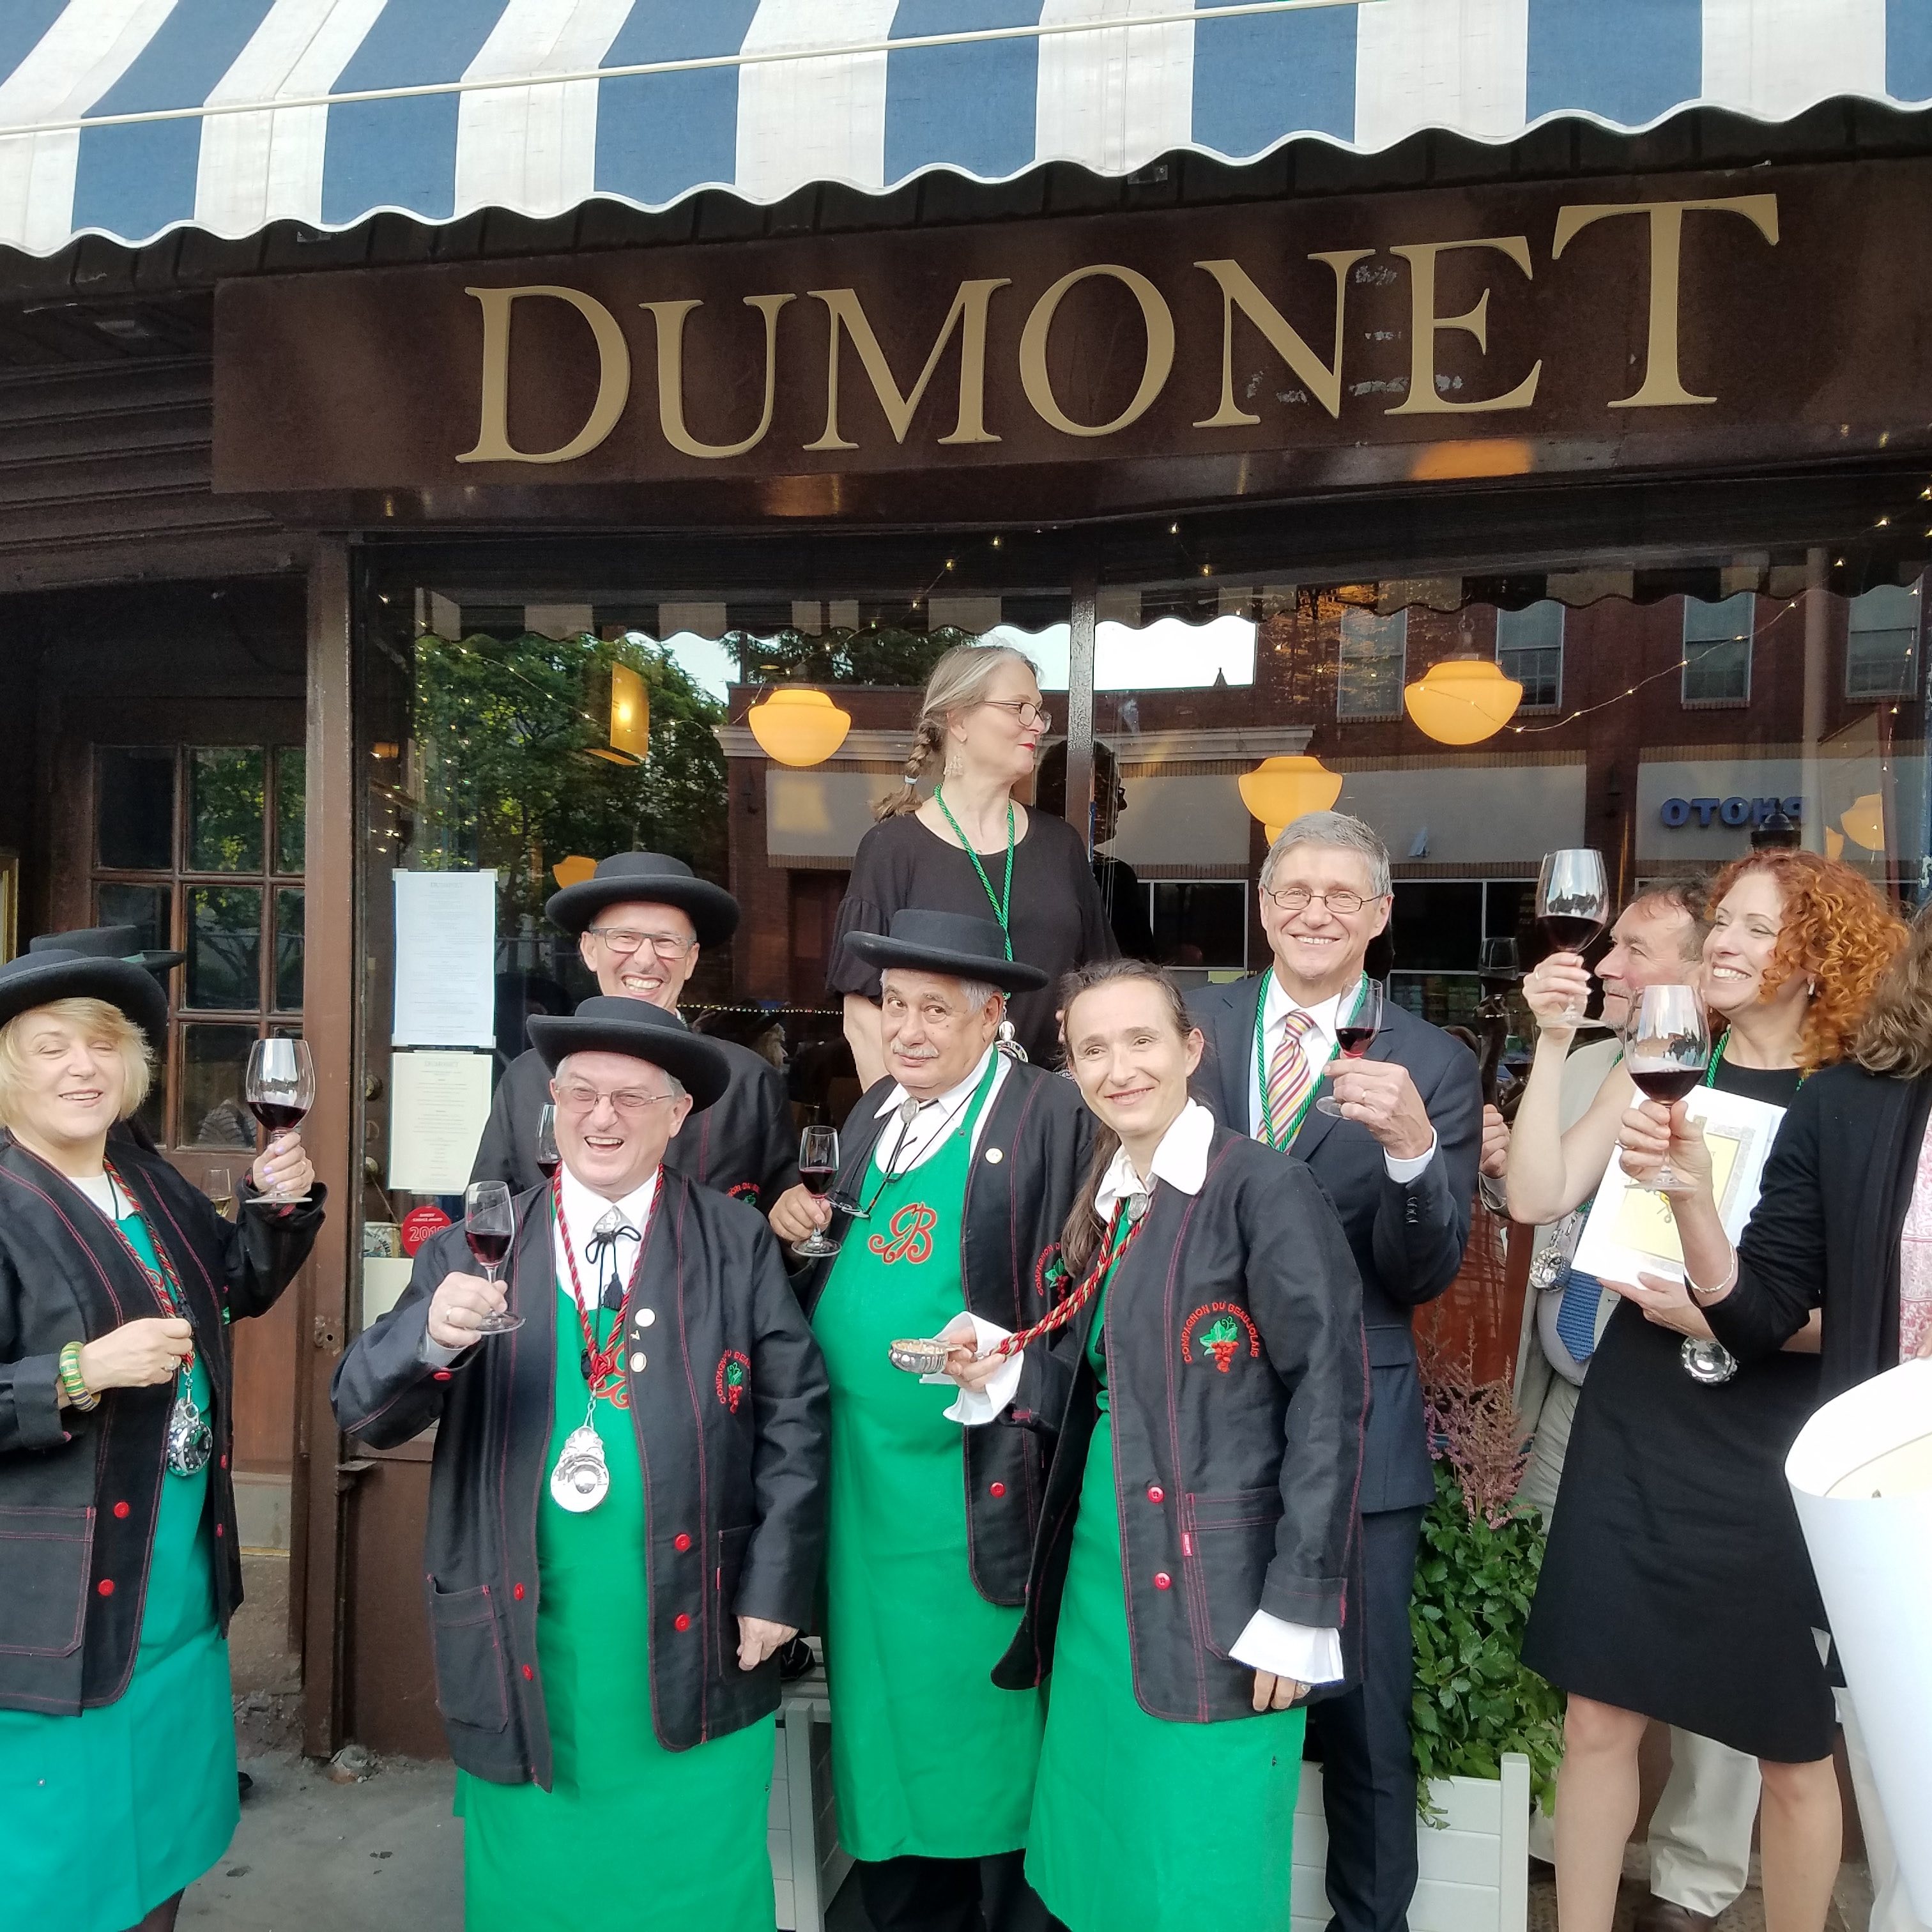 Scott's admittance into Ordre des Compagnons du Beaujolais was celebrated with a ceremony and dinner at Dumonet in Brooklyn.